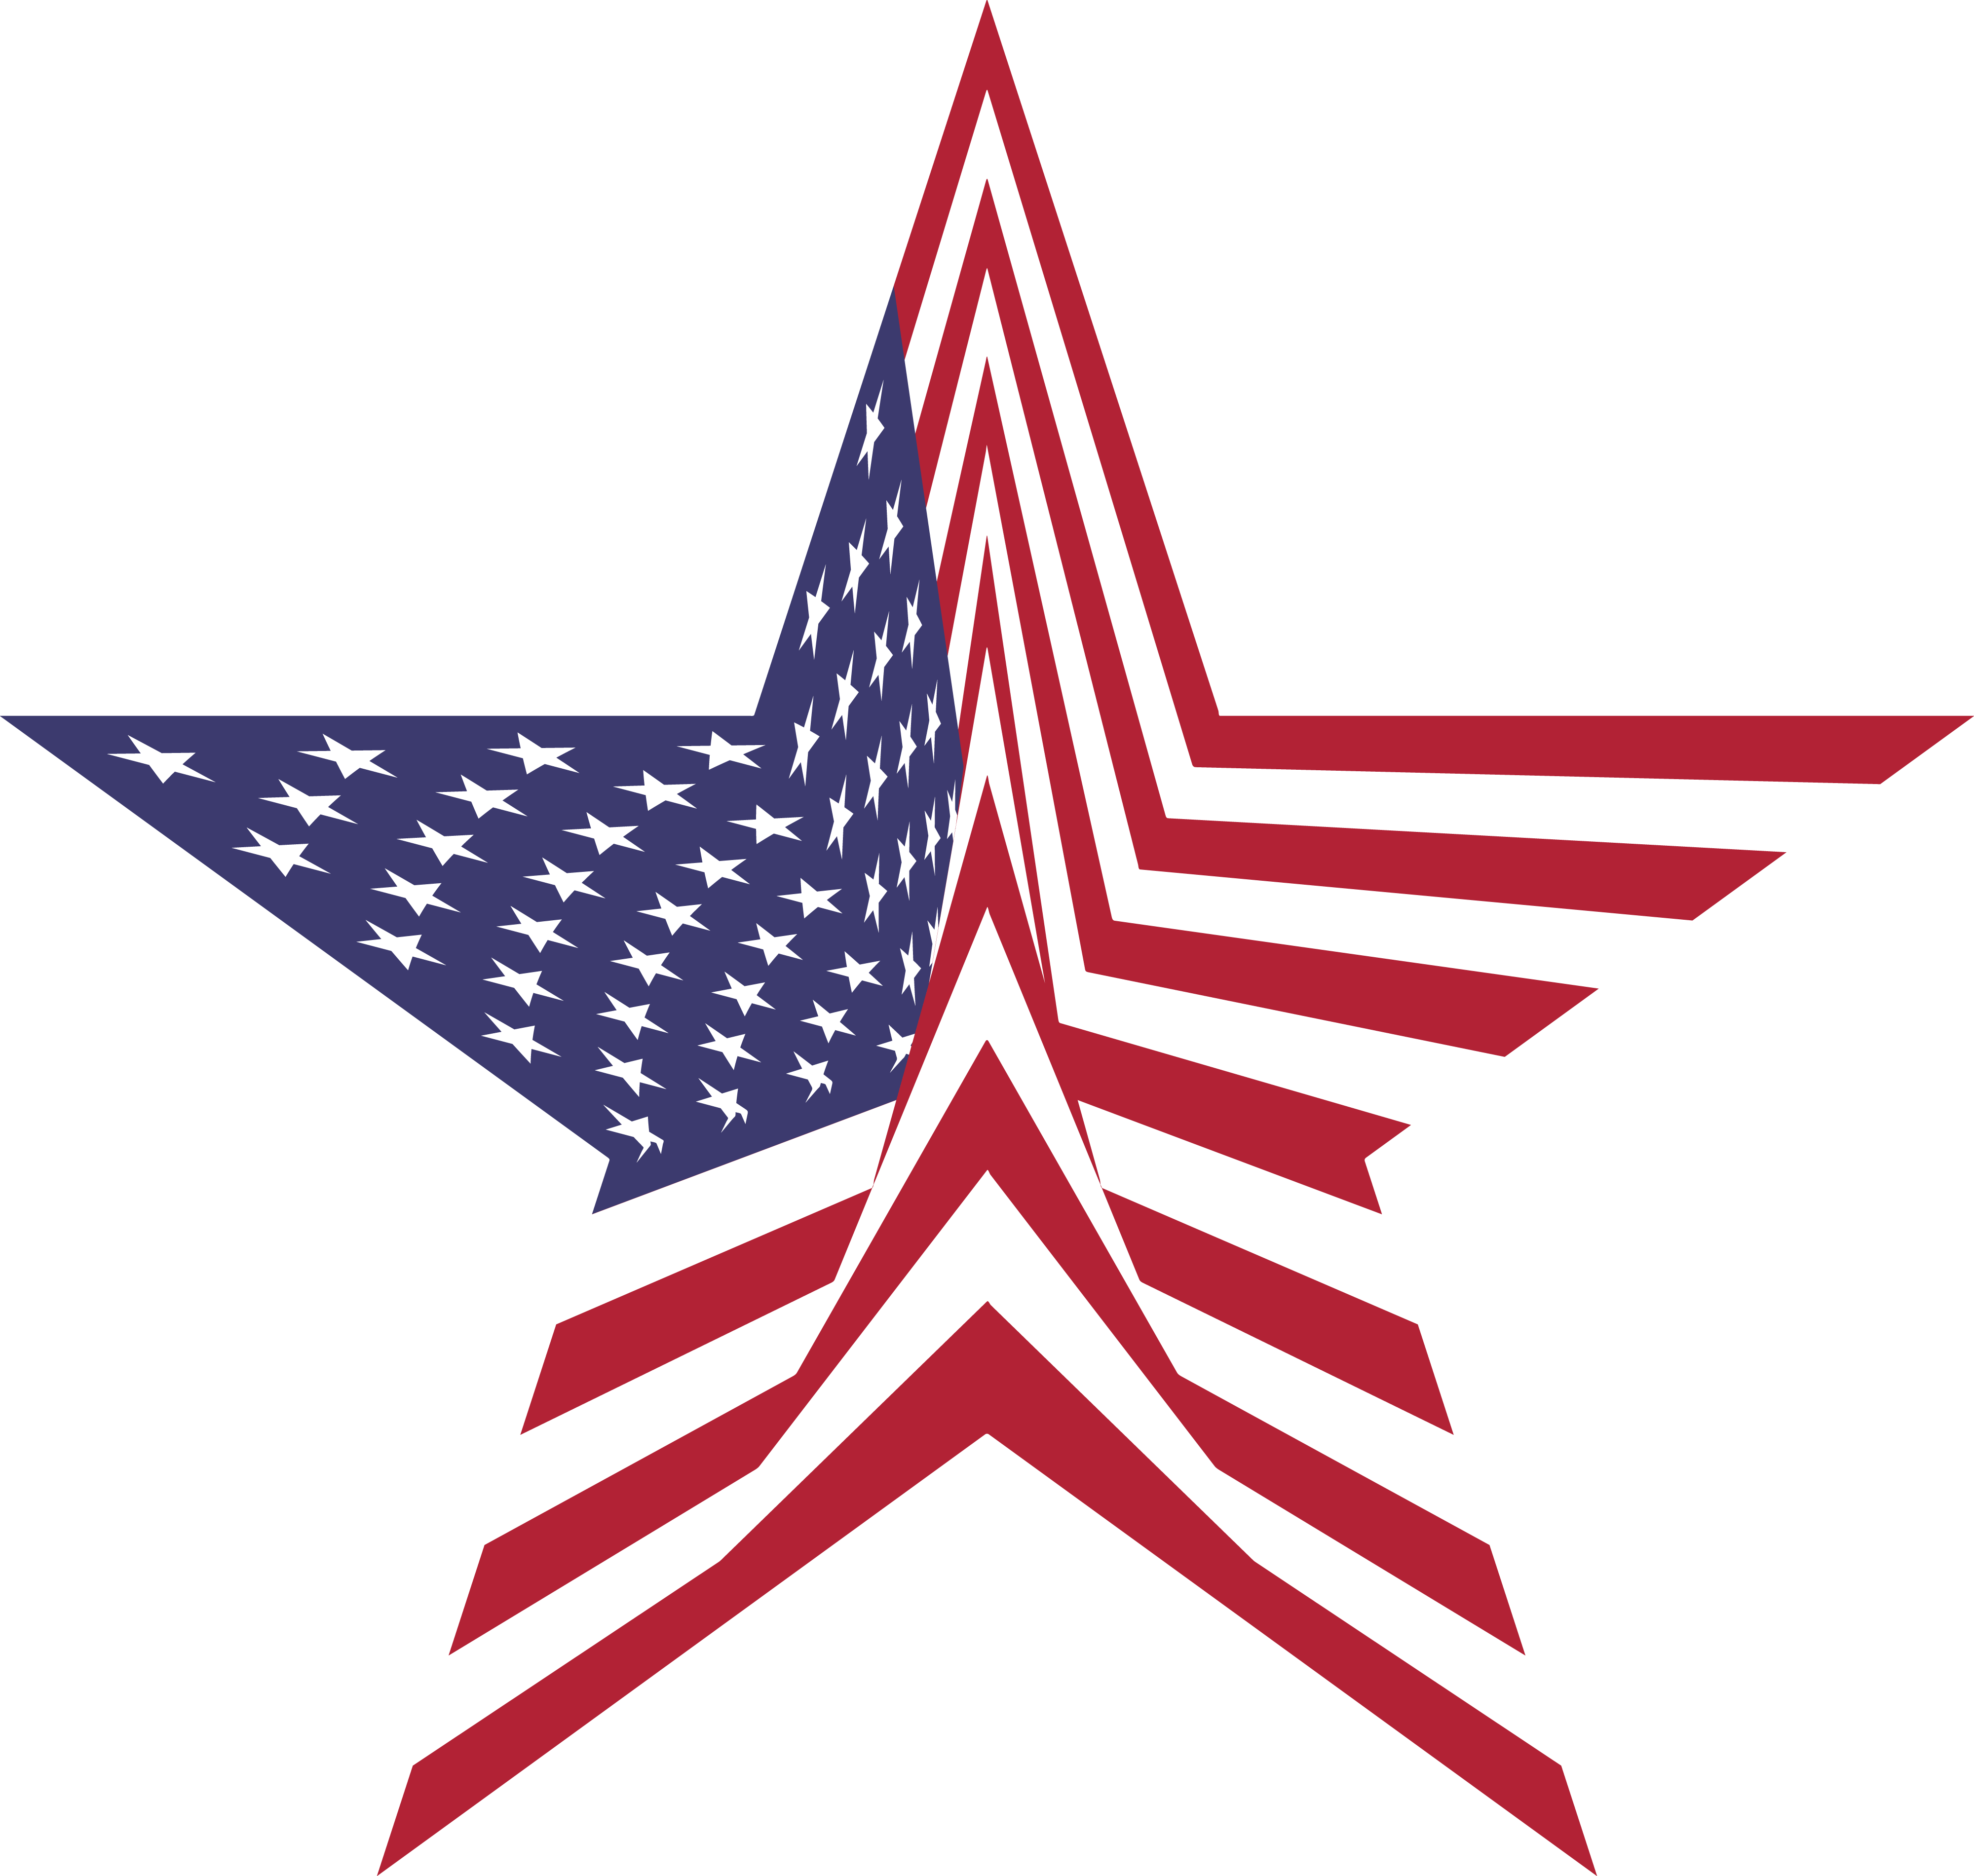 Free Clipart Of A star with an american flag pattern